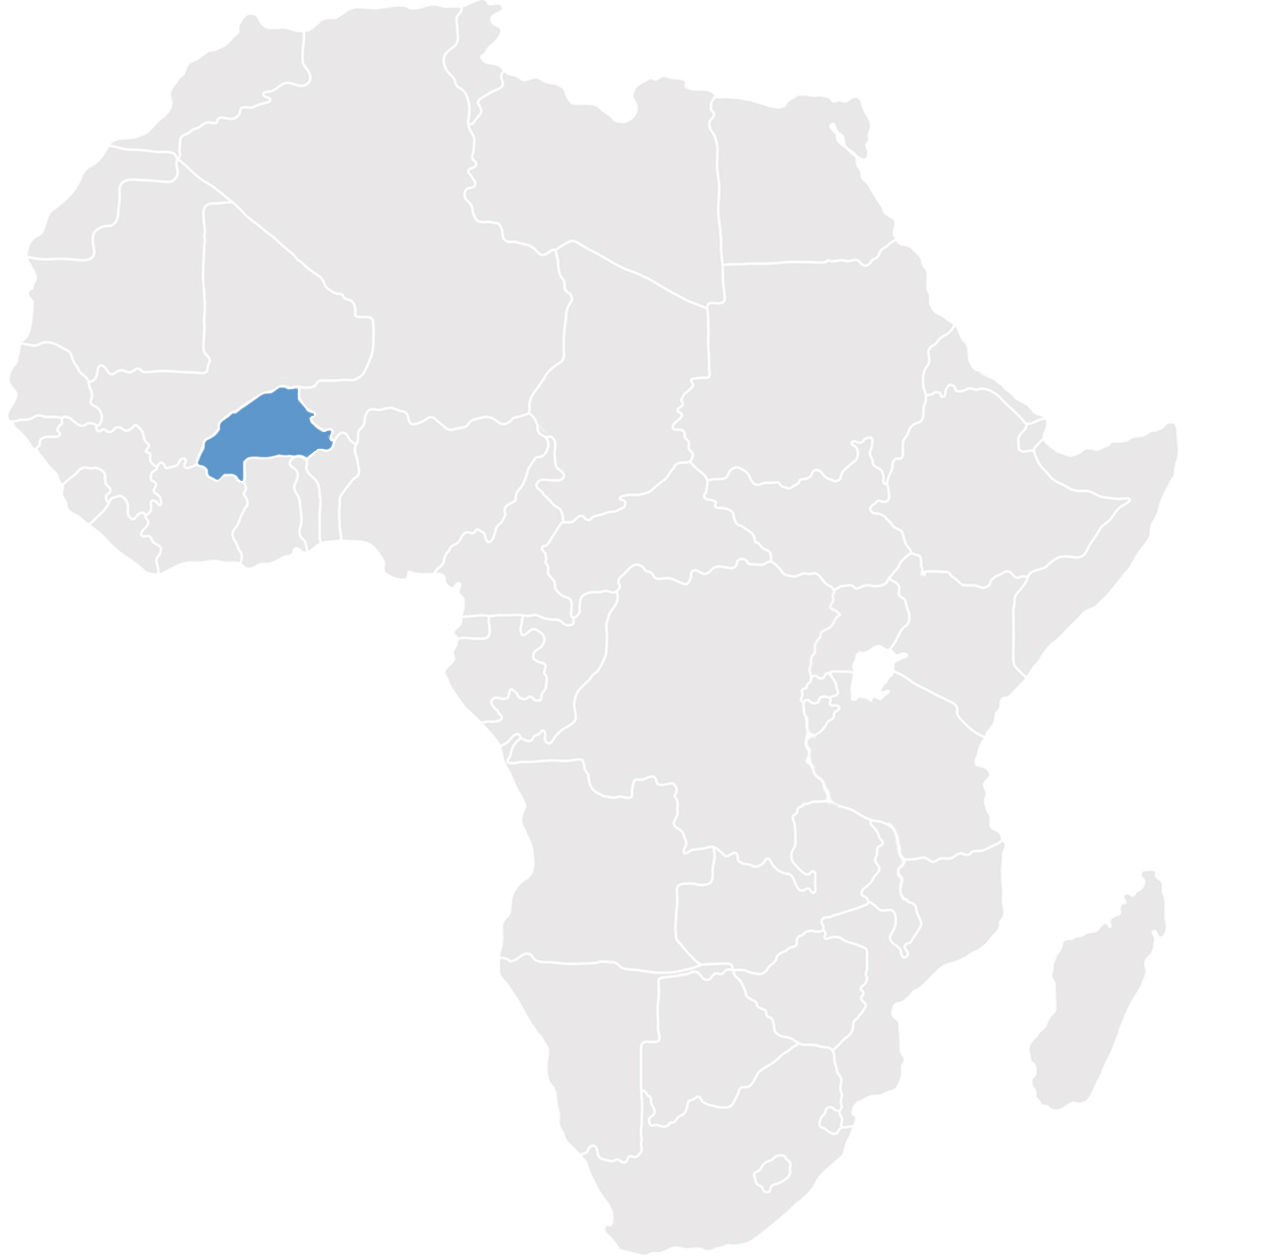 Gray map of Africa with Burkina Faso in blue